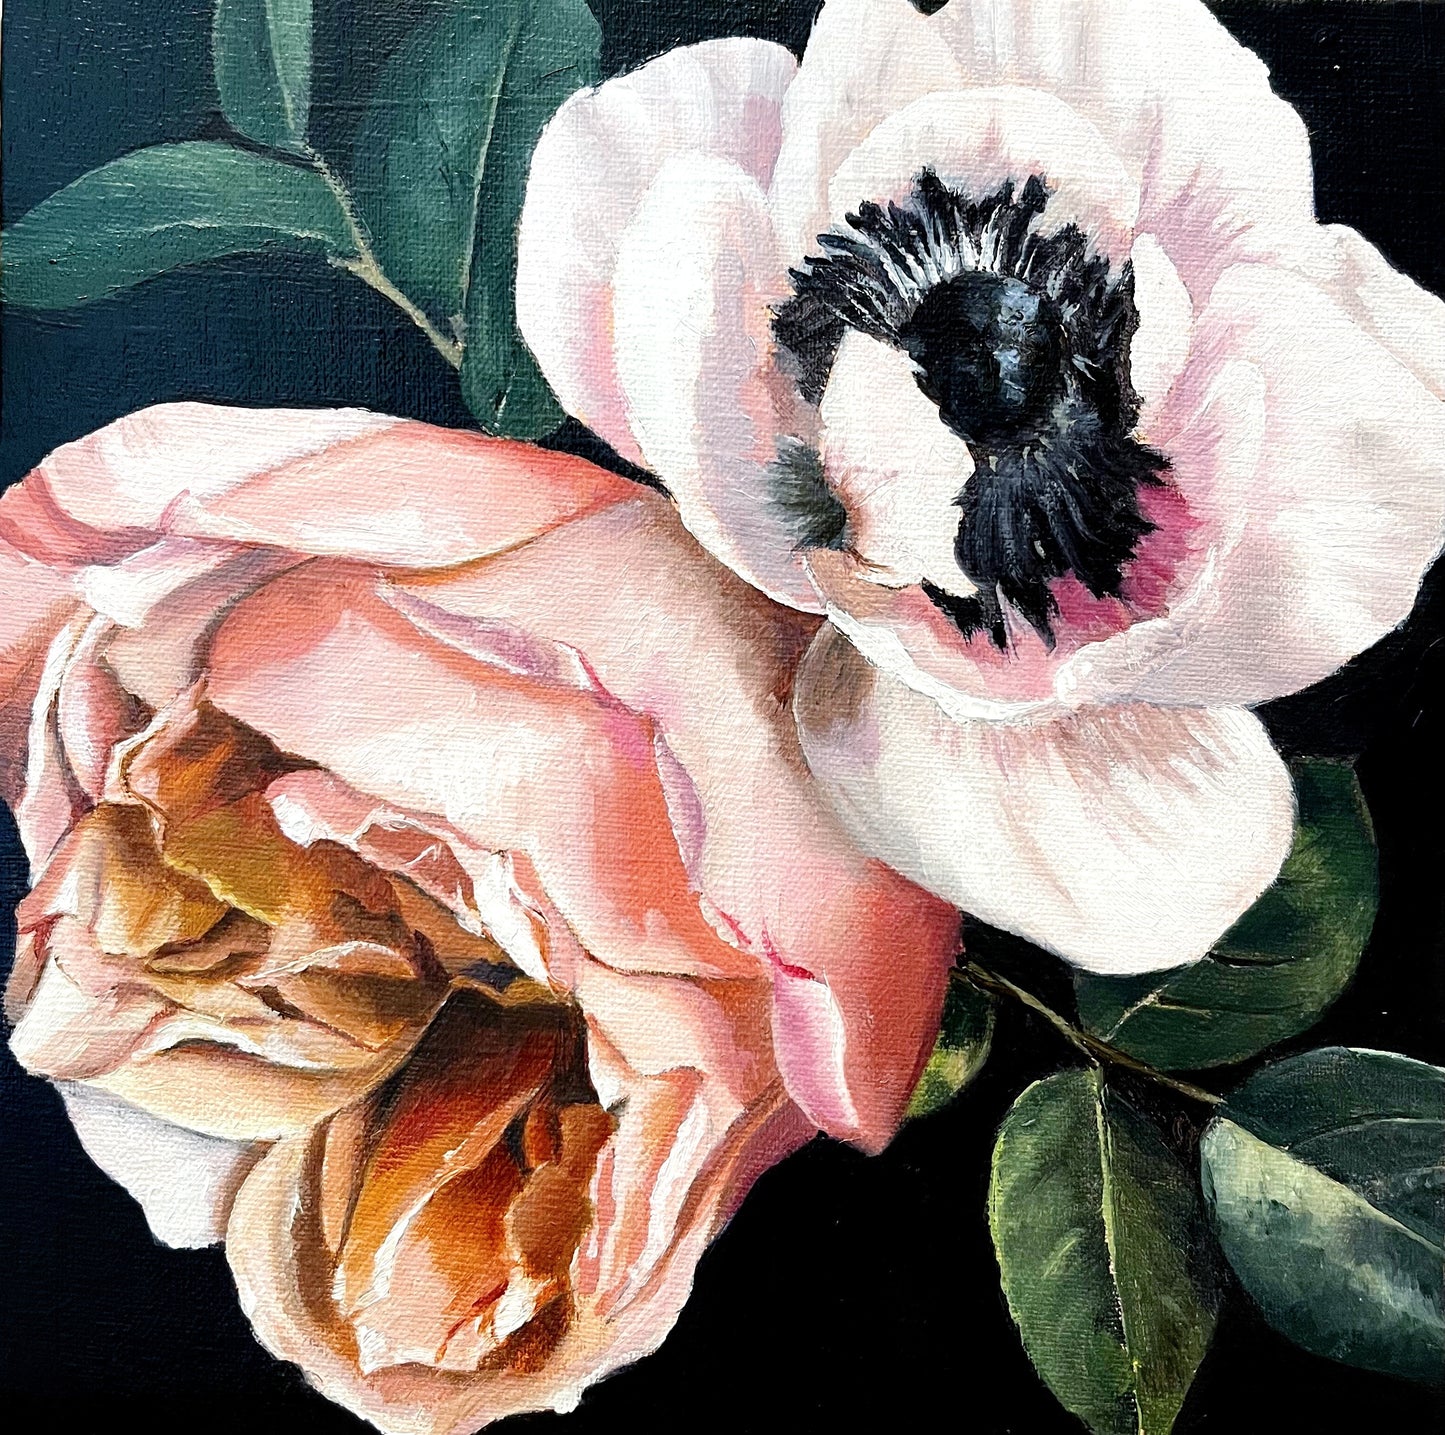 “Peony and Anenome”- 8x8” oil on linen panel